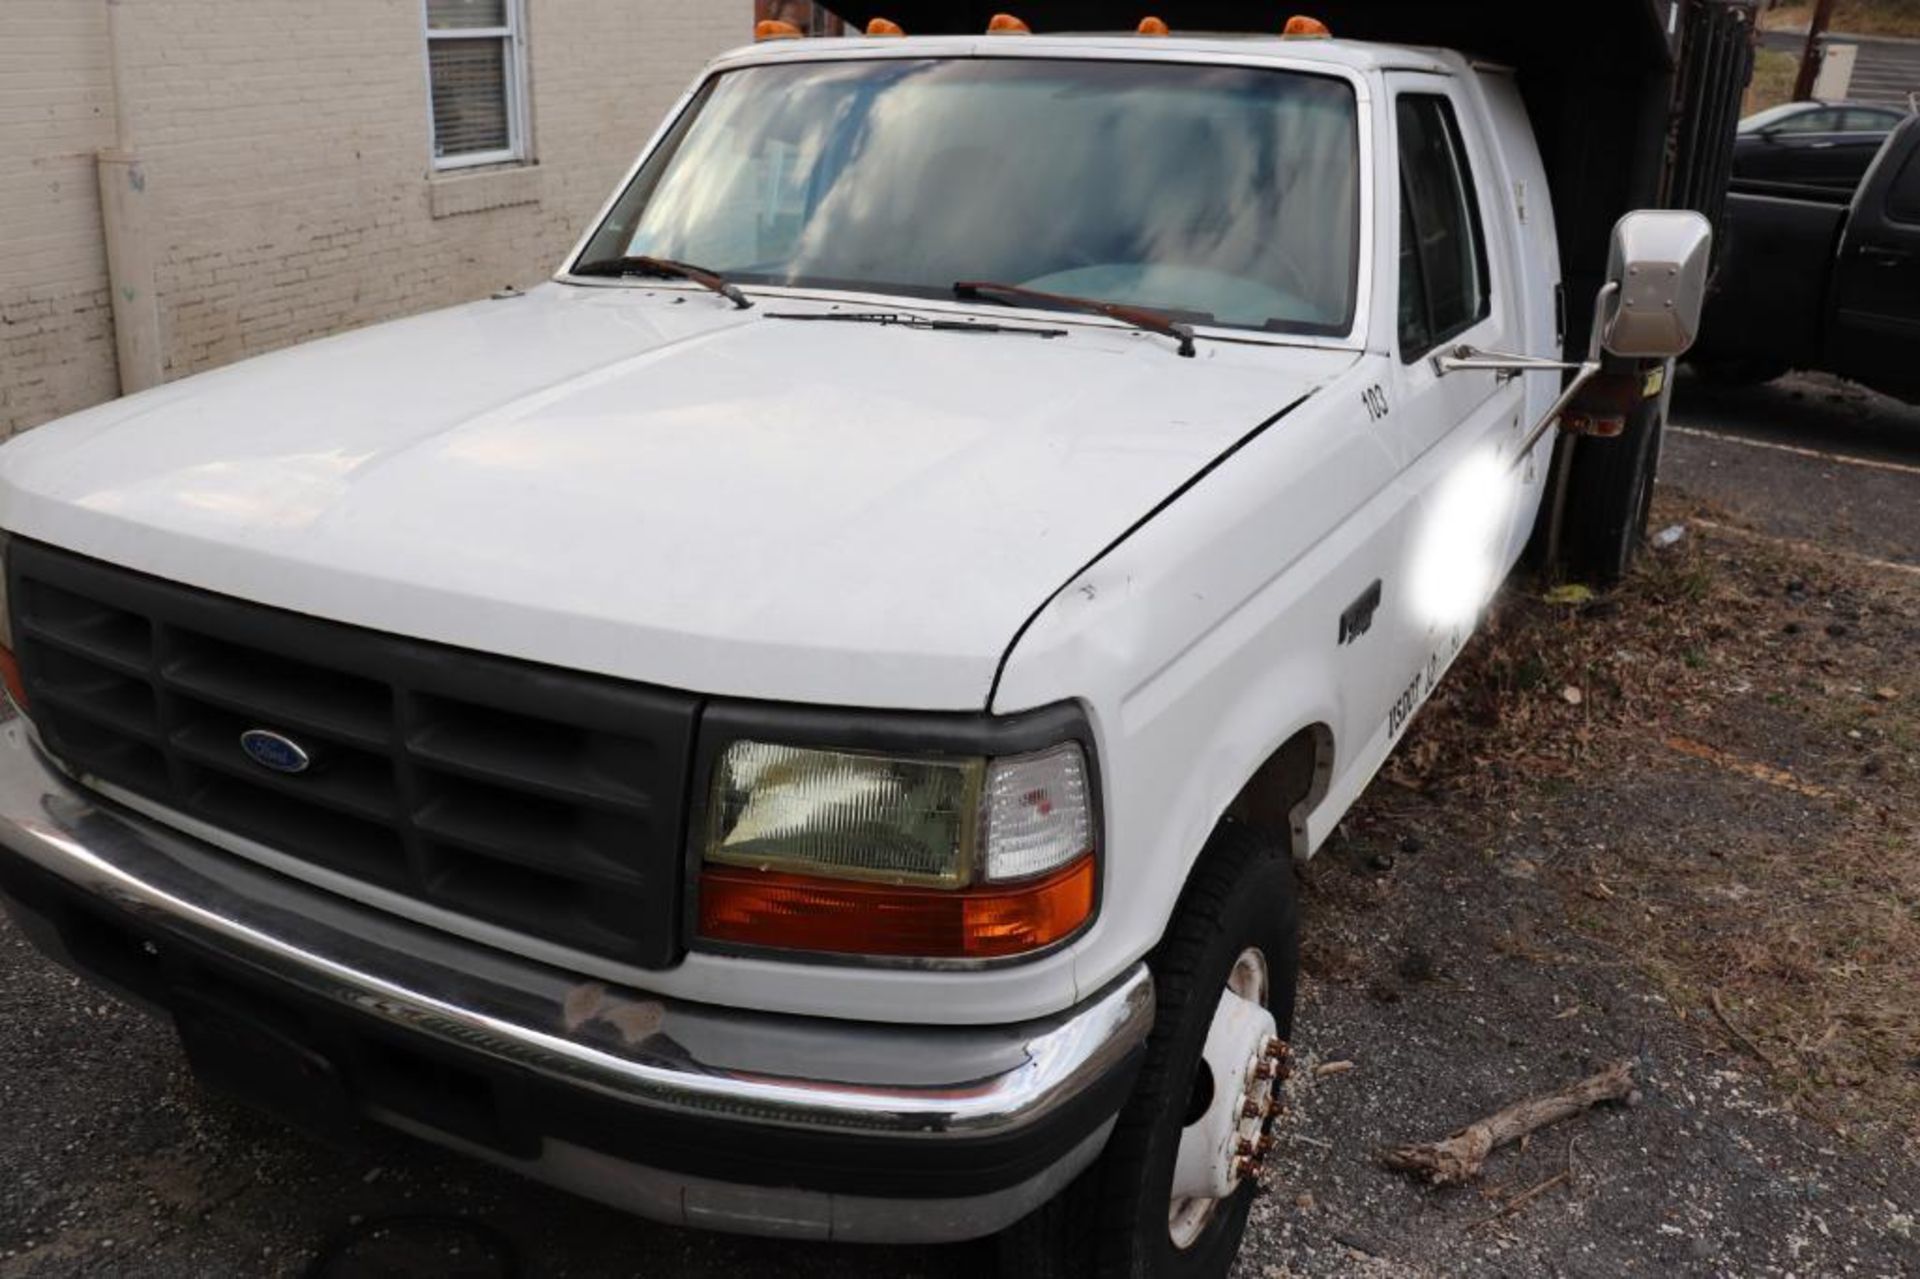 1996 Ford F-Superseries F450 dump truck, needs repair - Image 3 of 13